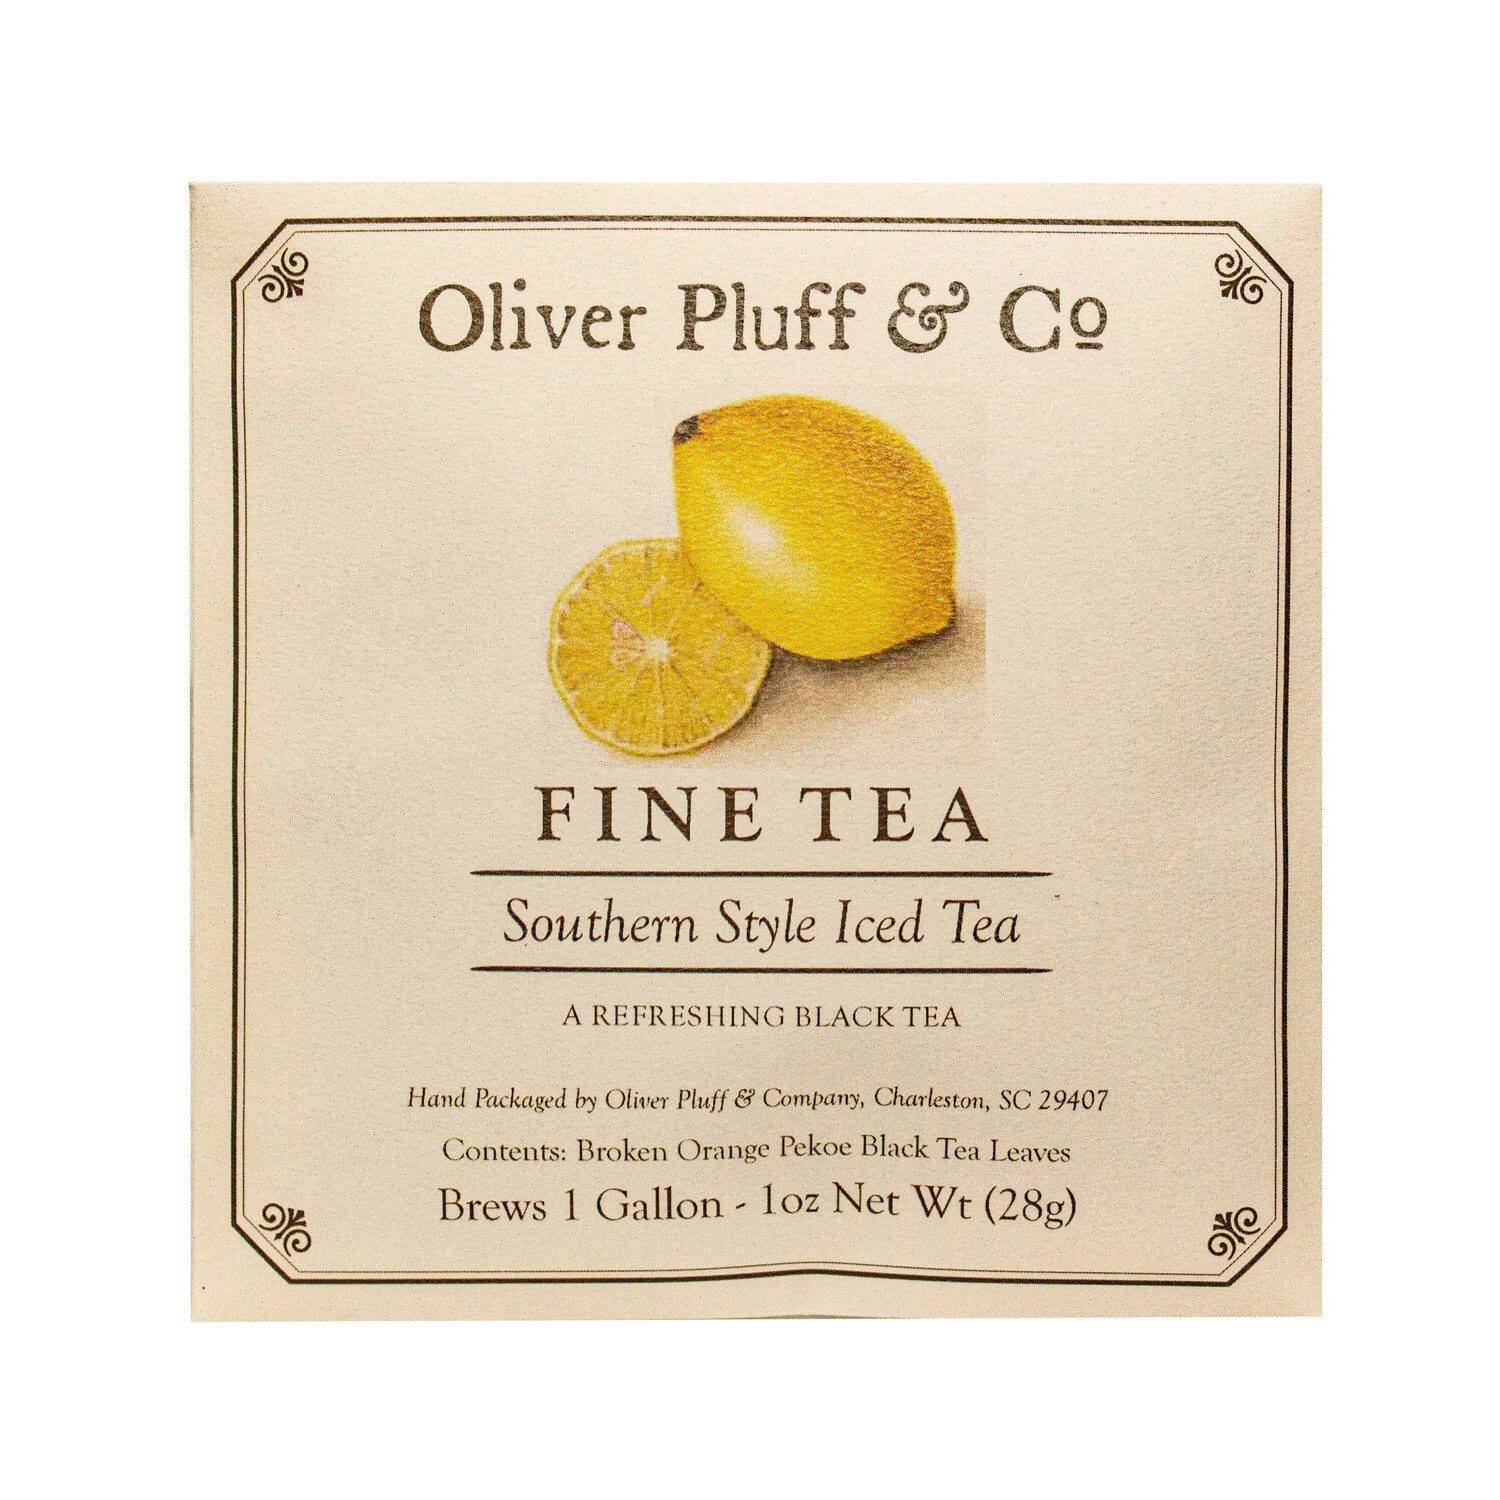 Oliver Pluff & Co - Southern Style Iced Tea - 1 Gallon Envelope